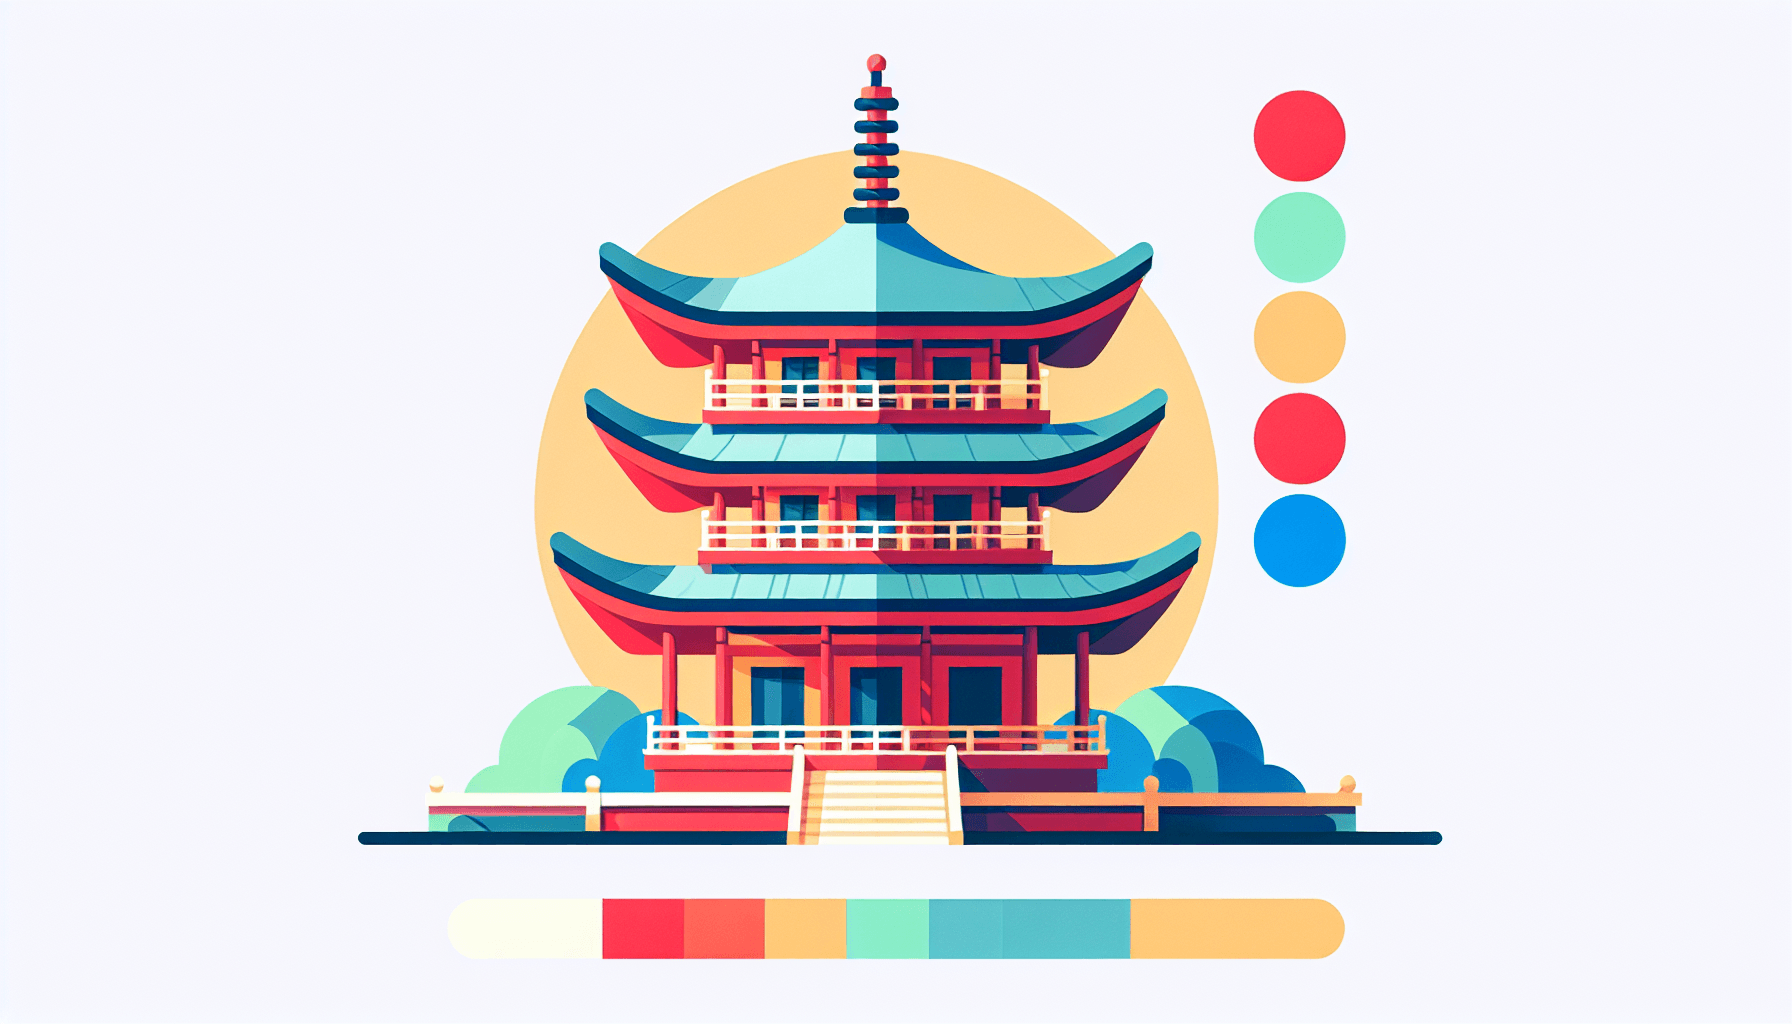 Pagoda in flat illustration style and white background, red #f47574, green #88c7a8, yellow #fcc44b, and blue #645bc8 colors.